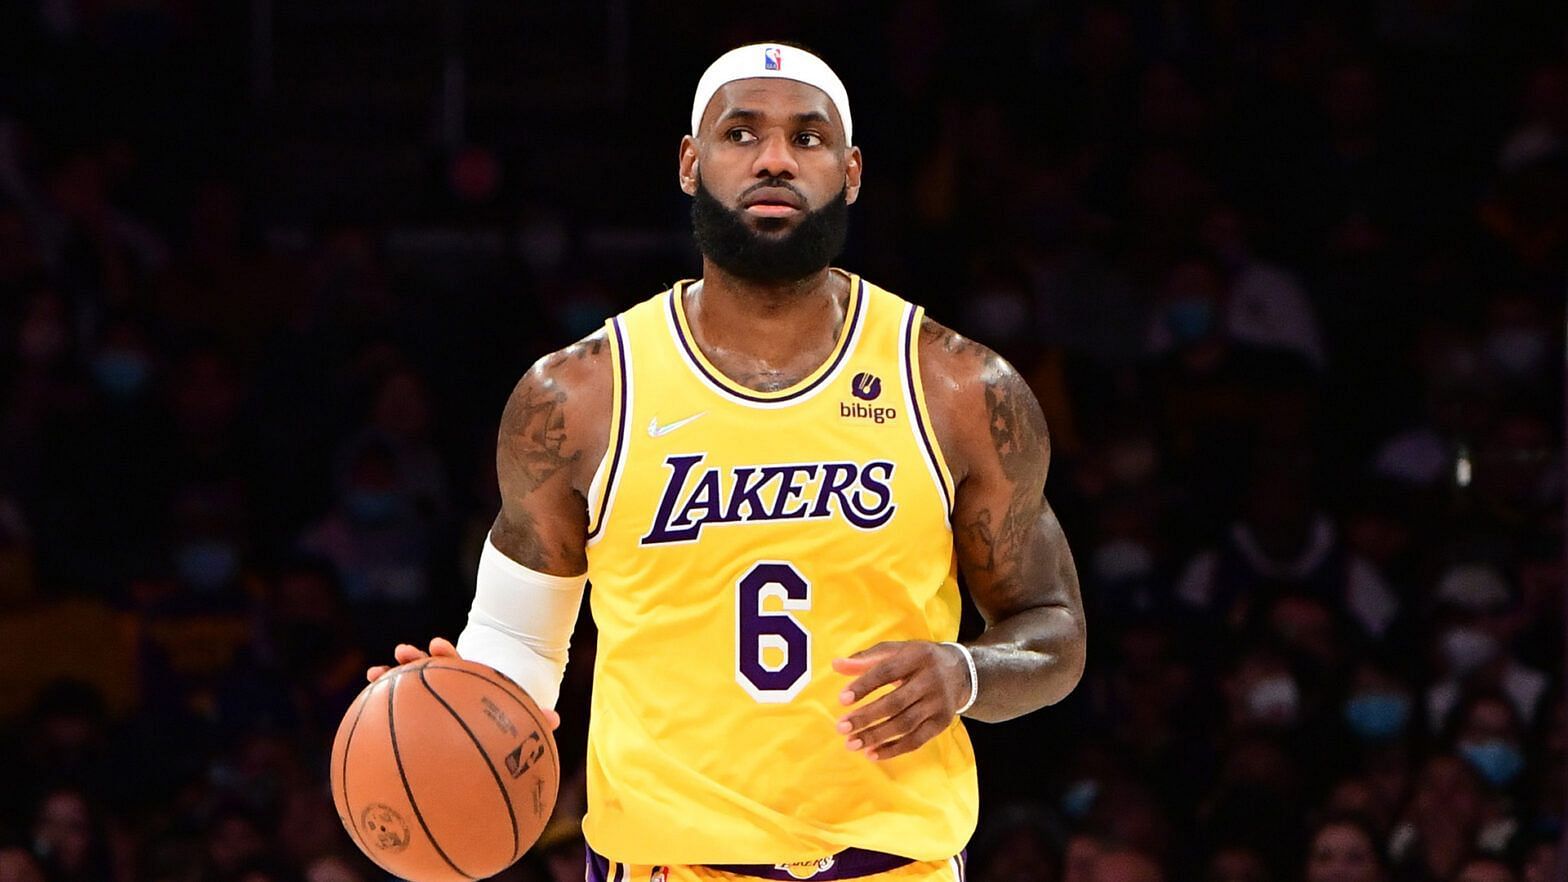 LeBron James could sign an extension next season if the LA Lakers can provide him a better supporting cast [Photo: NBA.com]